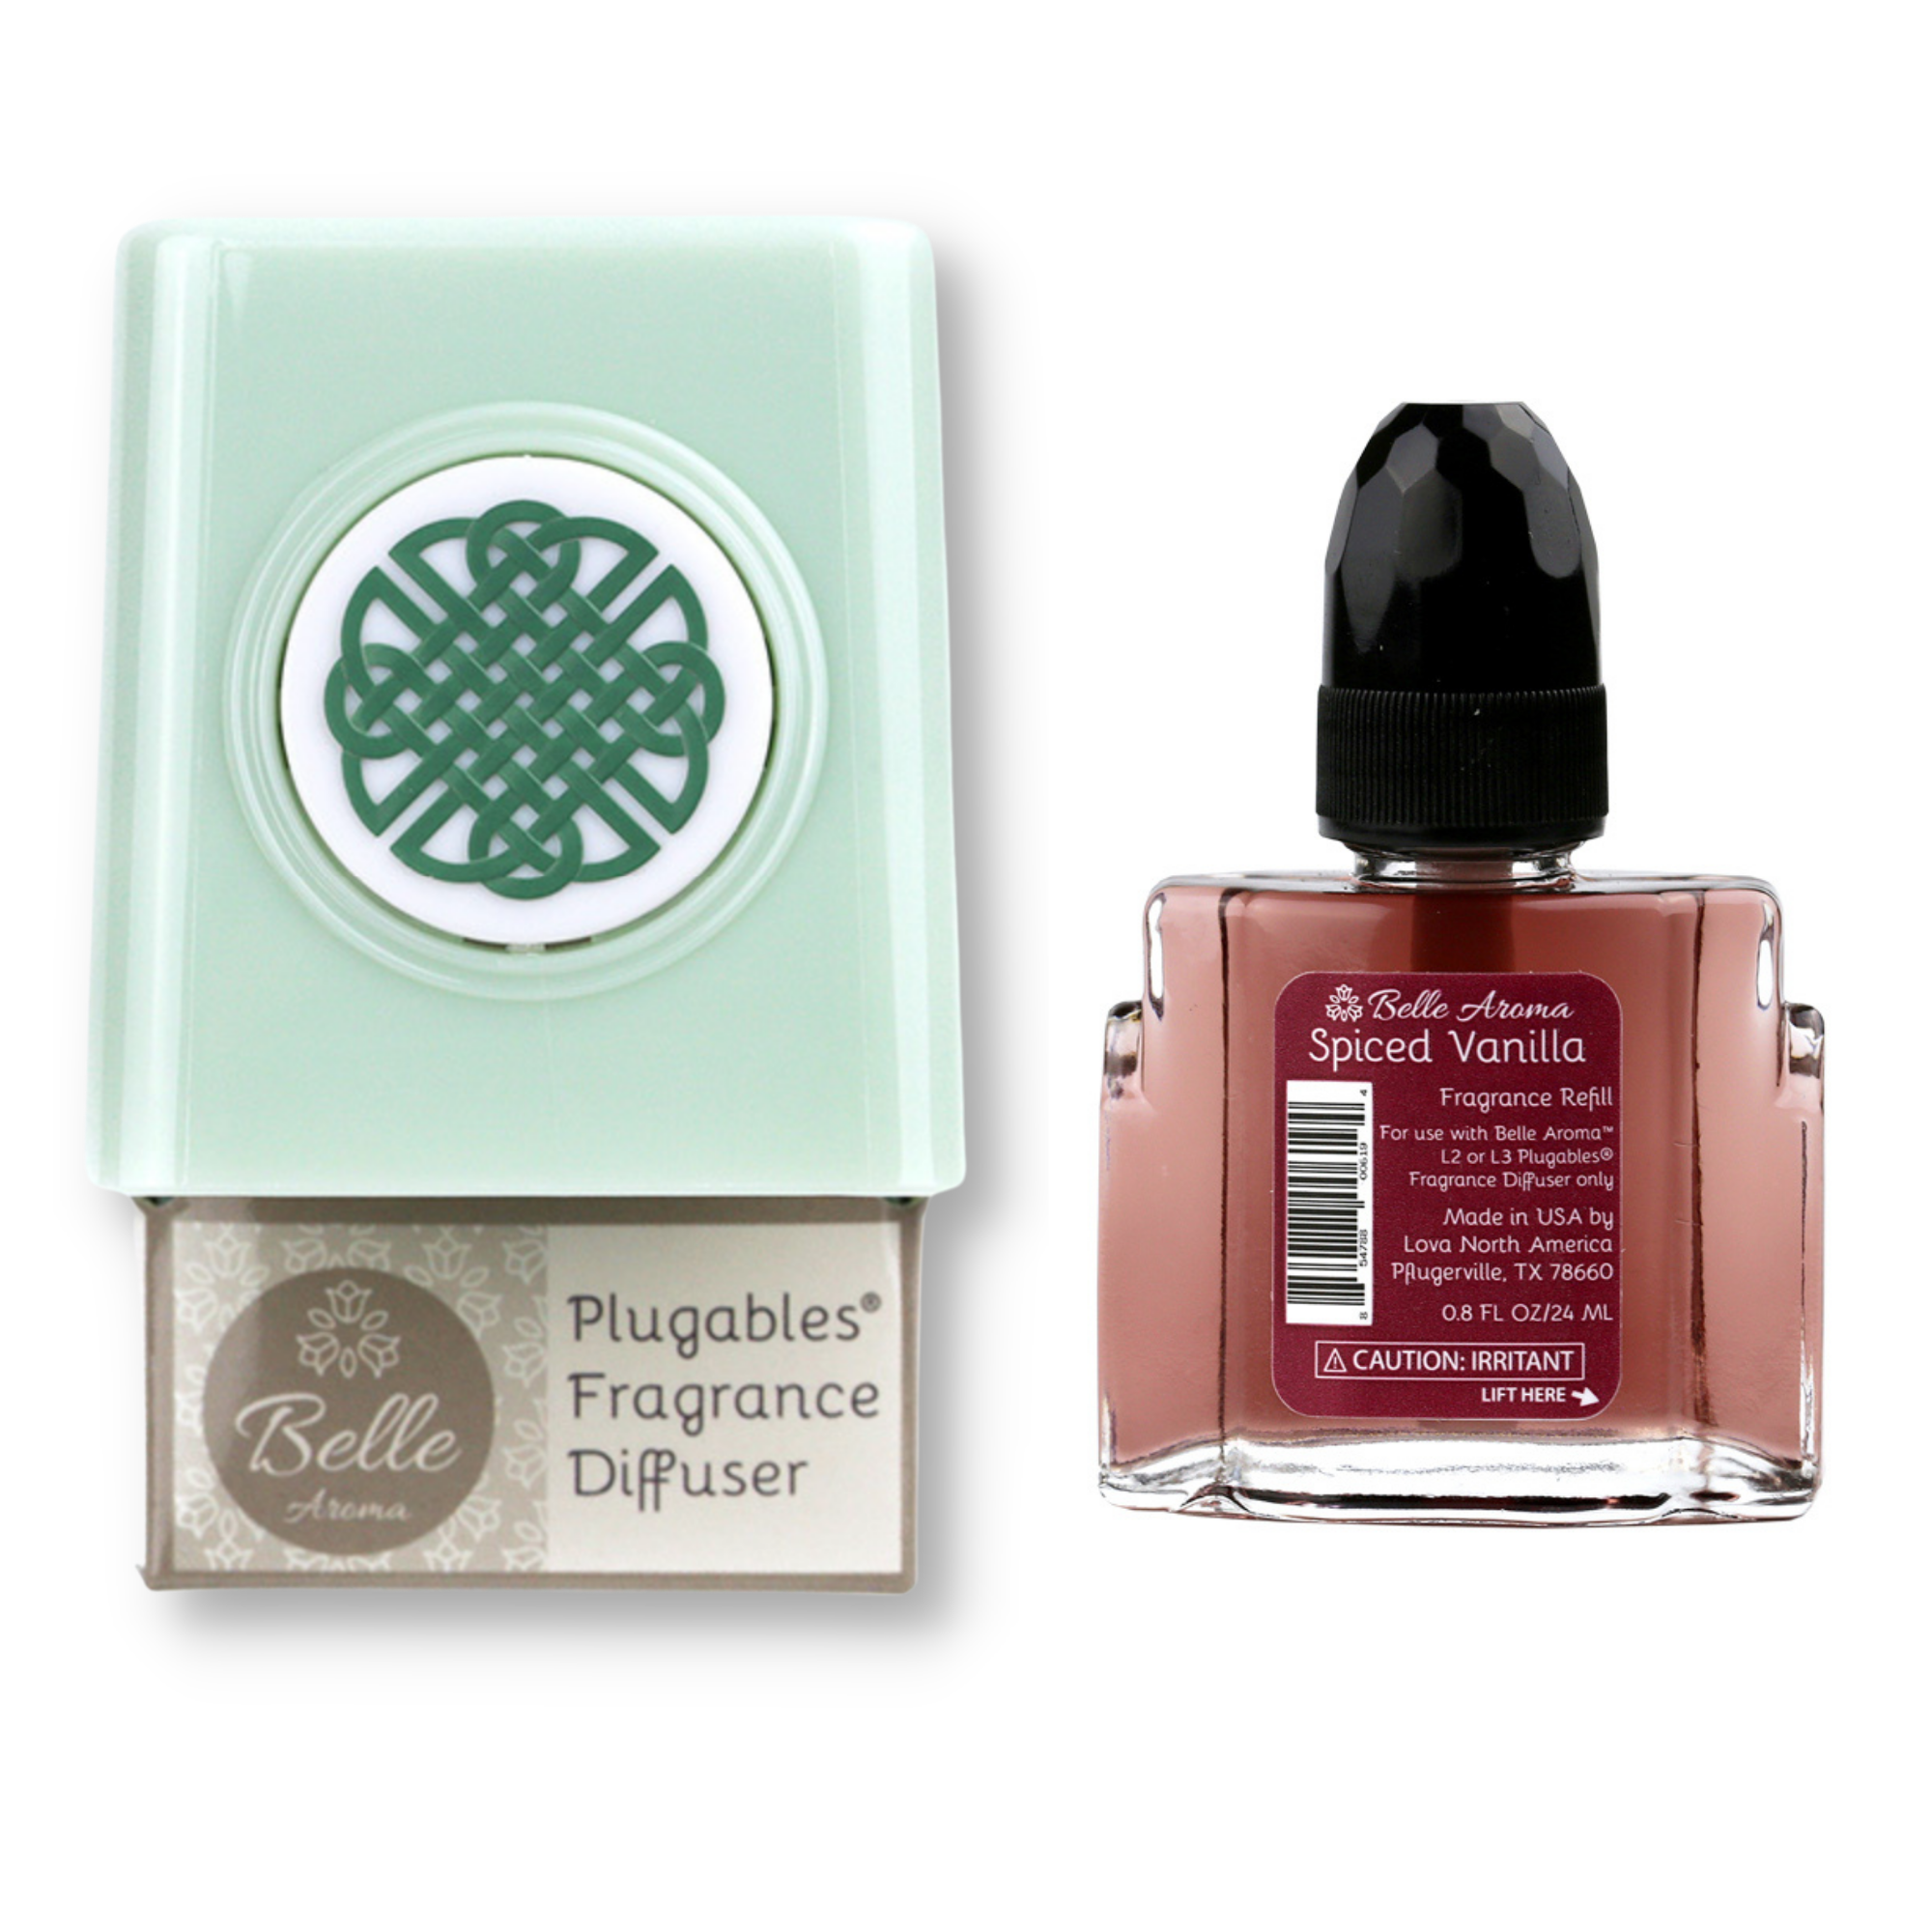 Celtic Knot Medallion Plugables® Plugin Electric Scented Oil Diffuser - Sea Glass with Spiced Vanilla Fragrance Oil Home Fragrance Accessories